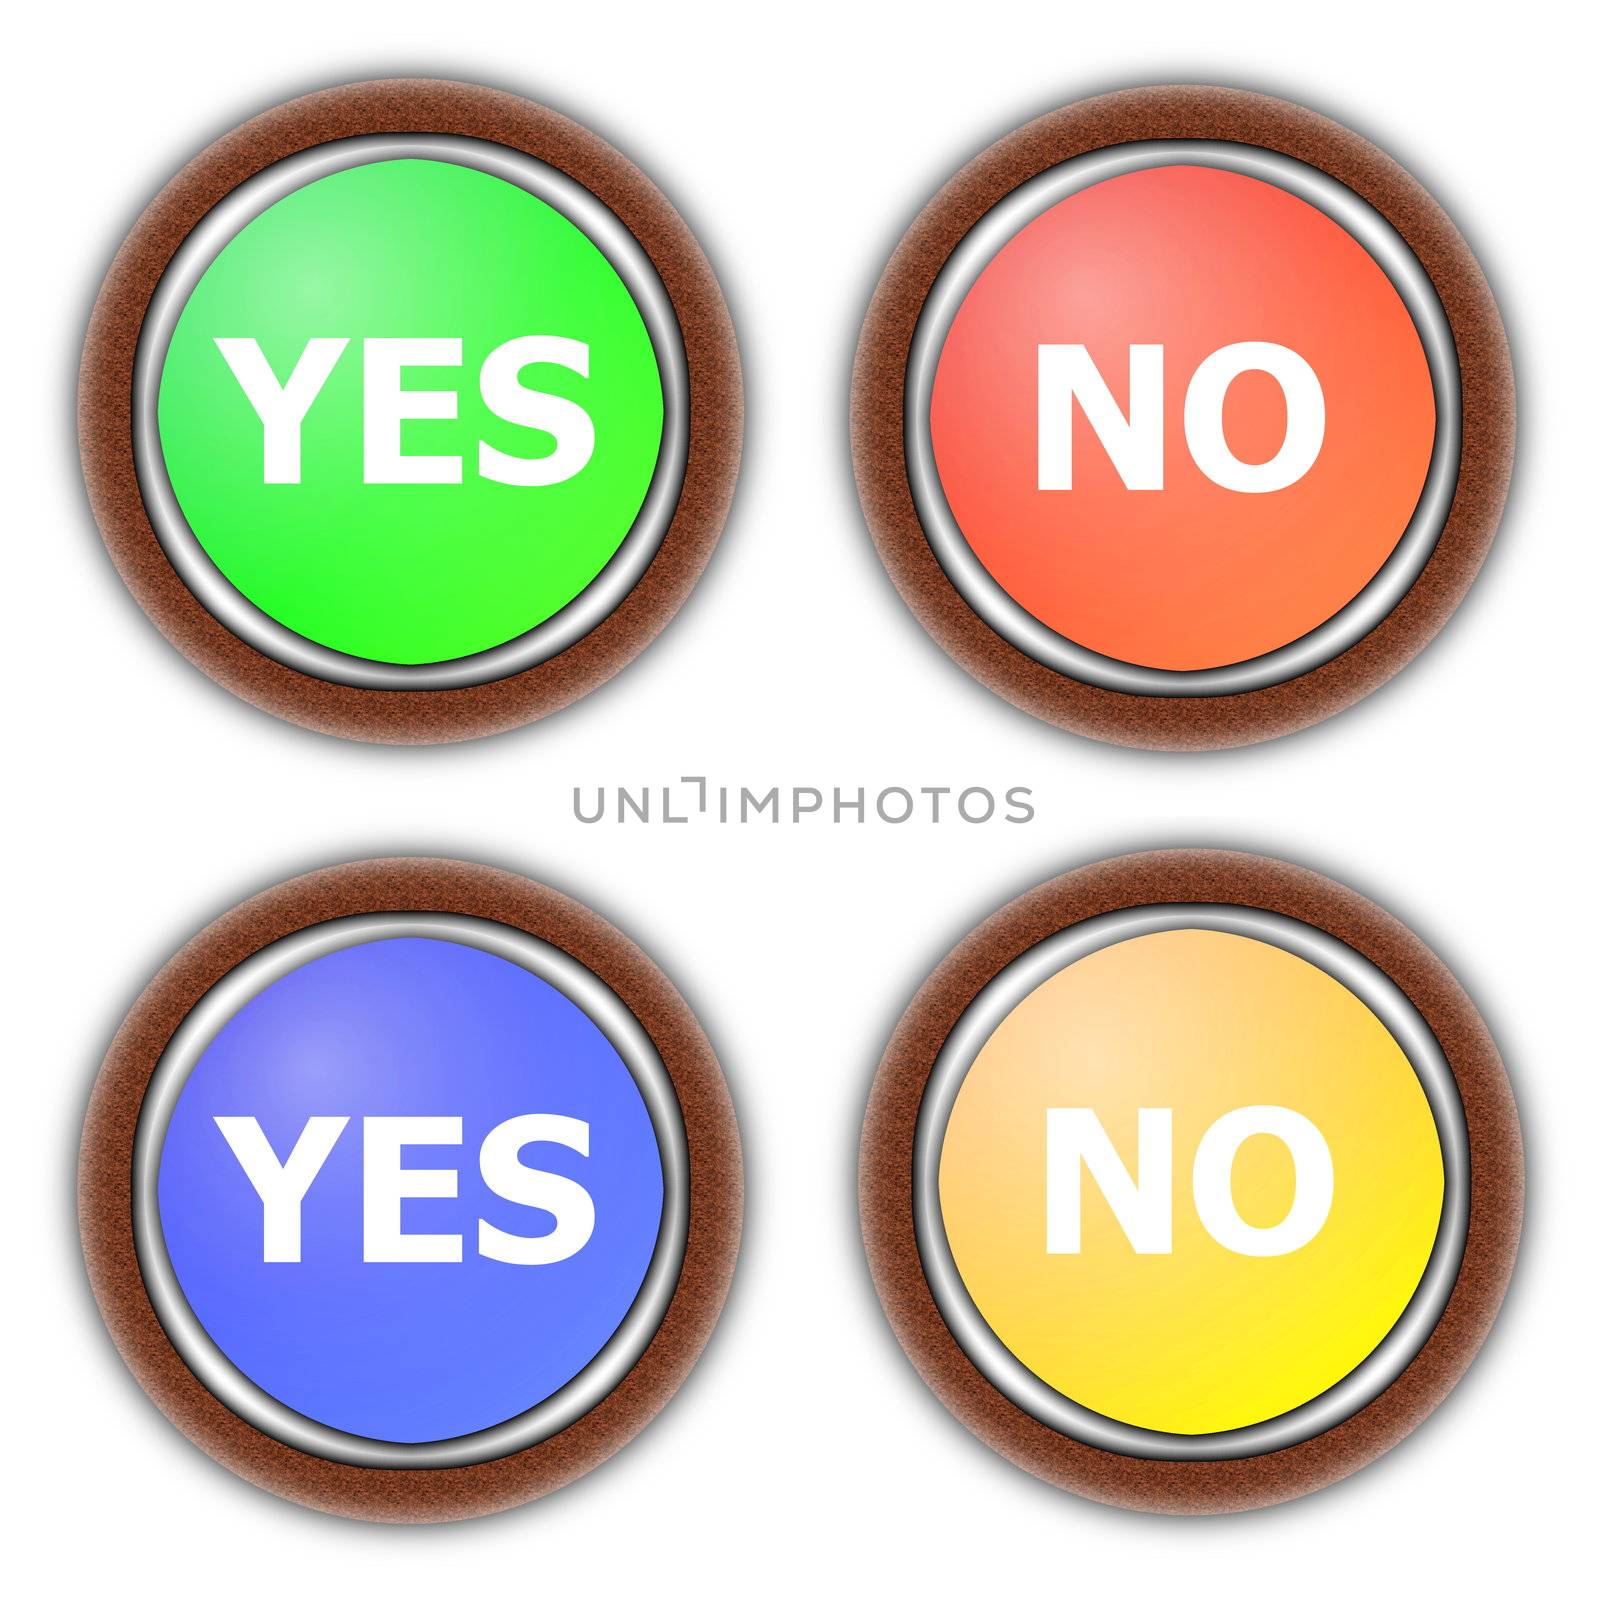 yes and no button collection isolated on white background